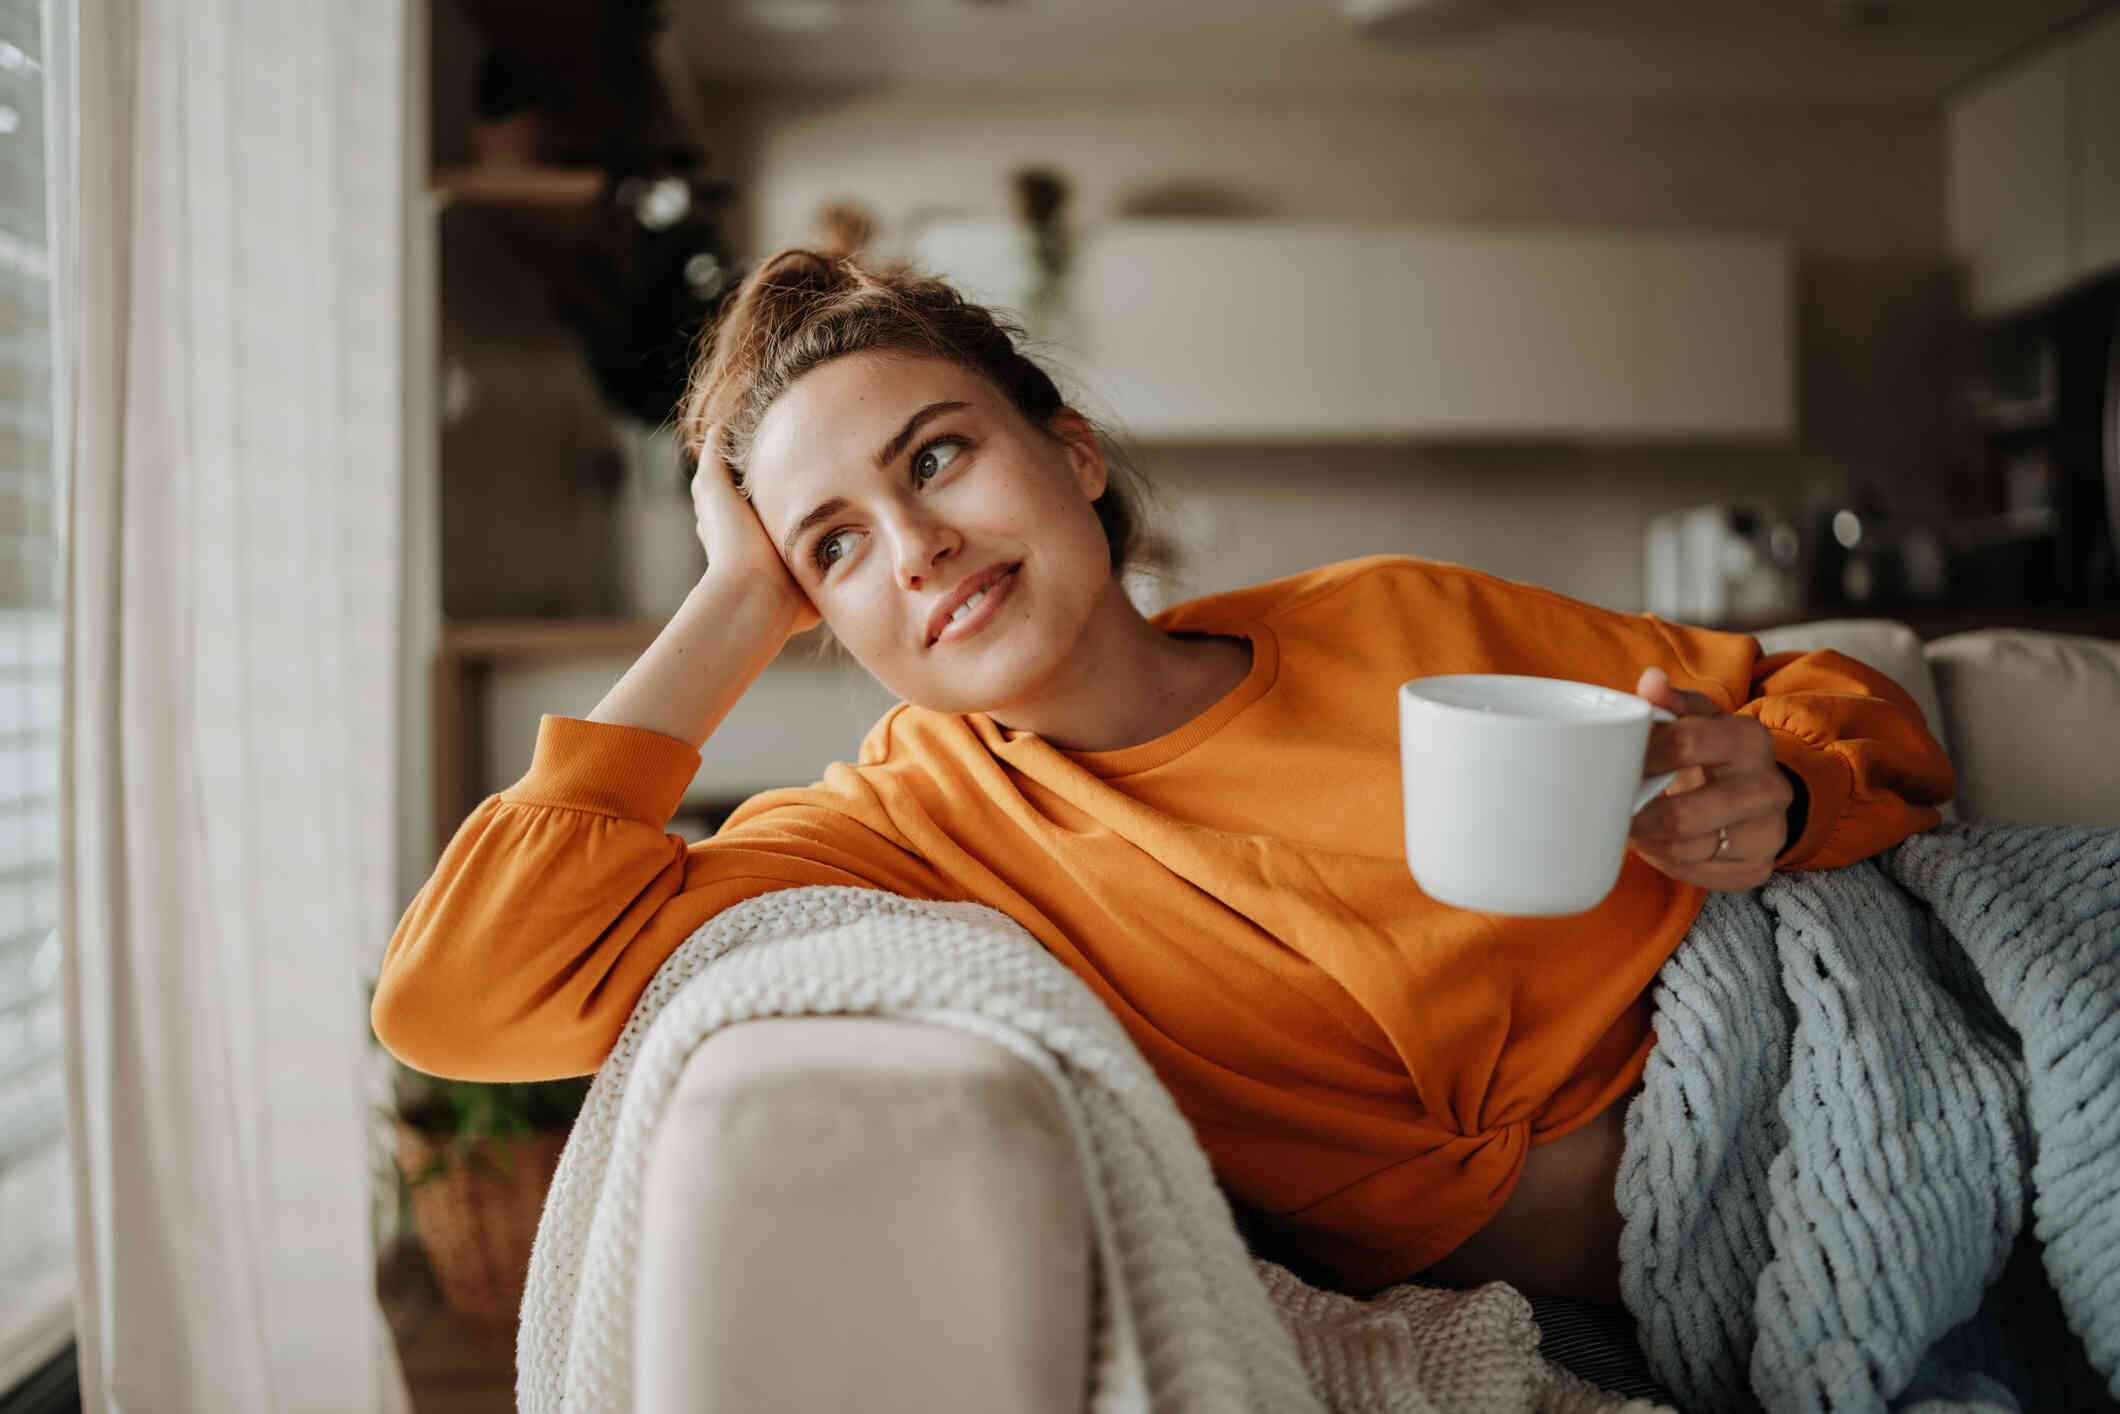 A woman in an orange shirt reclines on a chair with a cup of coffe and smiles softly while gazing out of a window.